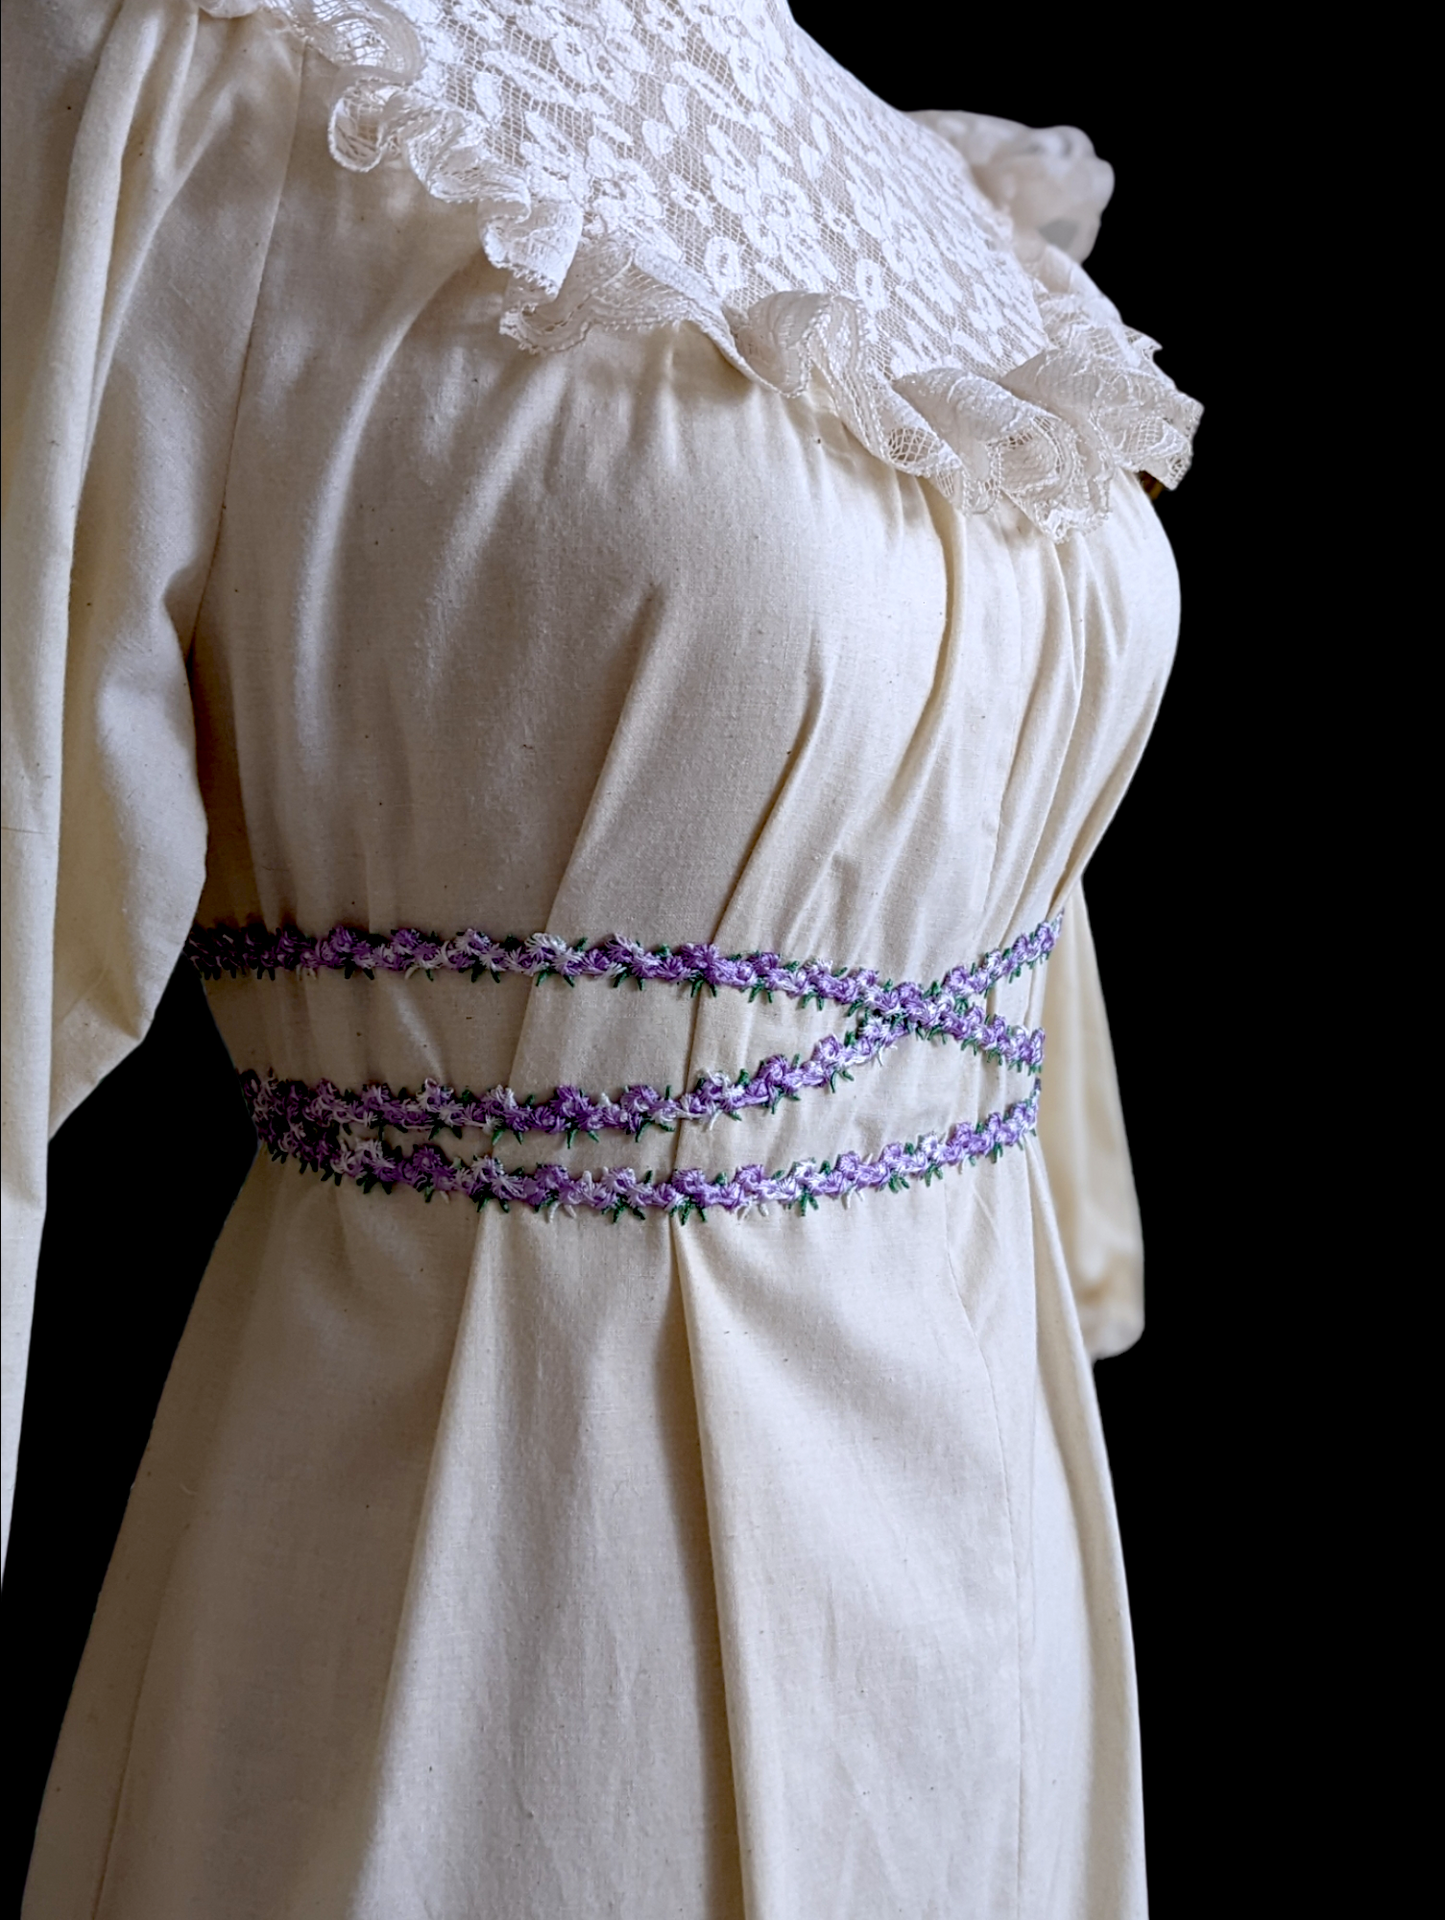 1970s Princess Kaiulani Wedding Dress with Half Sleeves, Victorian Inspired Design and Ruffles with Purple Flower Ribbon and Pockets